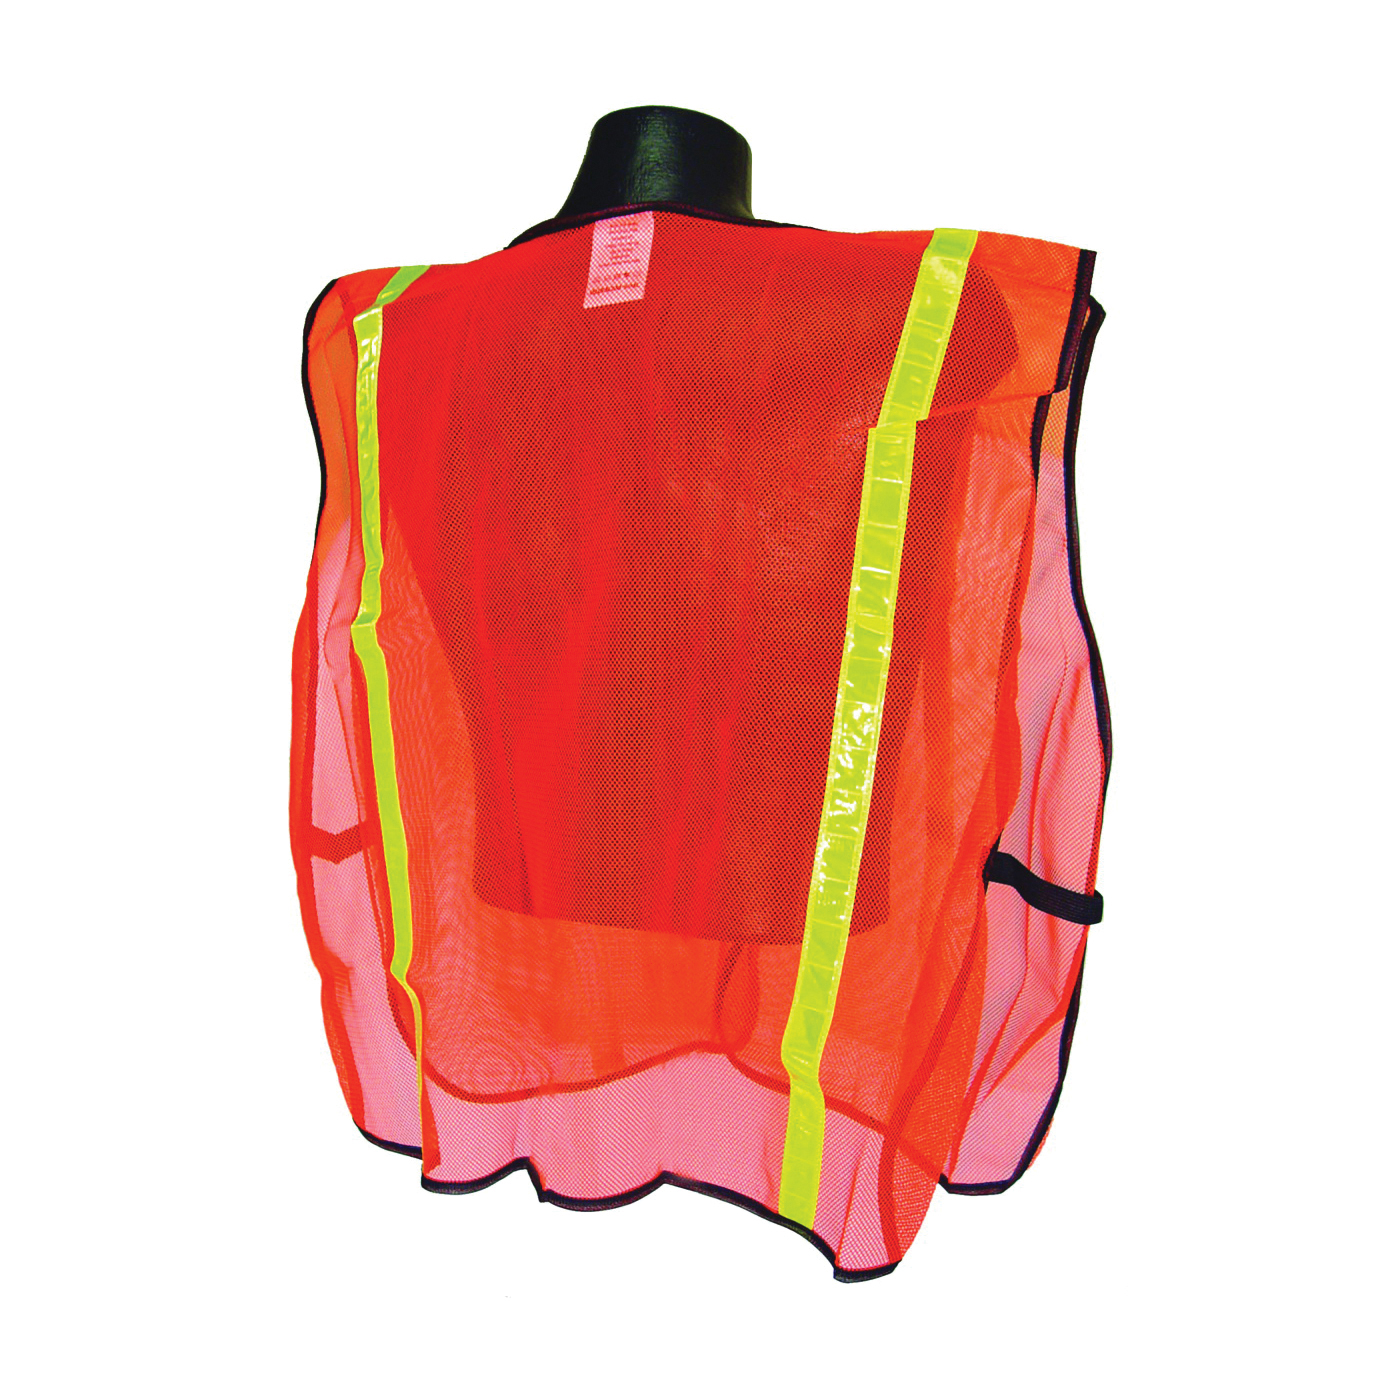 SVO1 Non-Rated Safety Vest, XL, Polyester, Green/Orange/Silver, Hook-and-Loop Closure